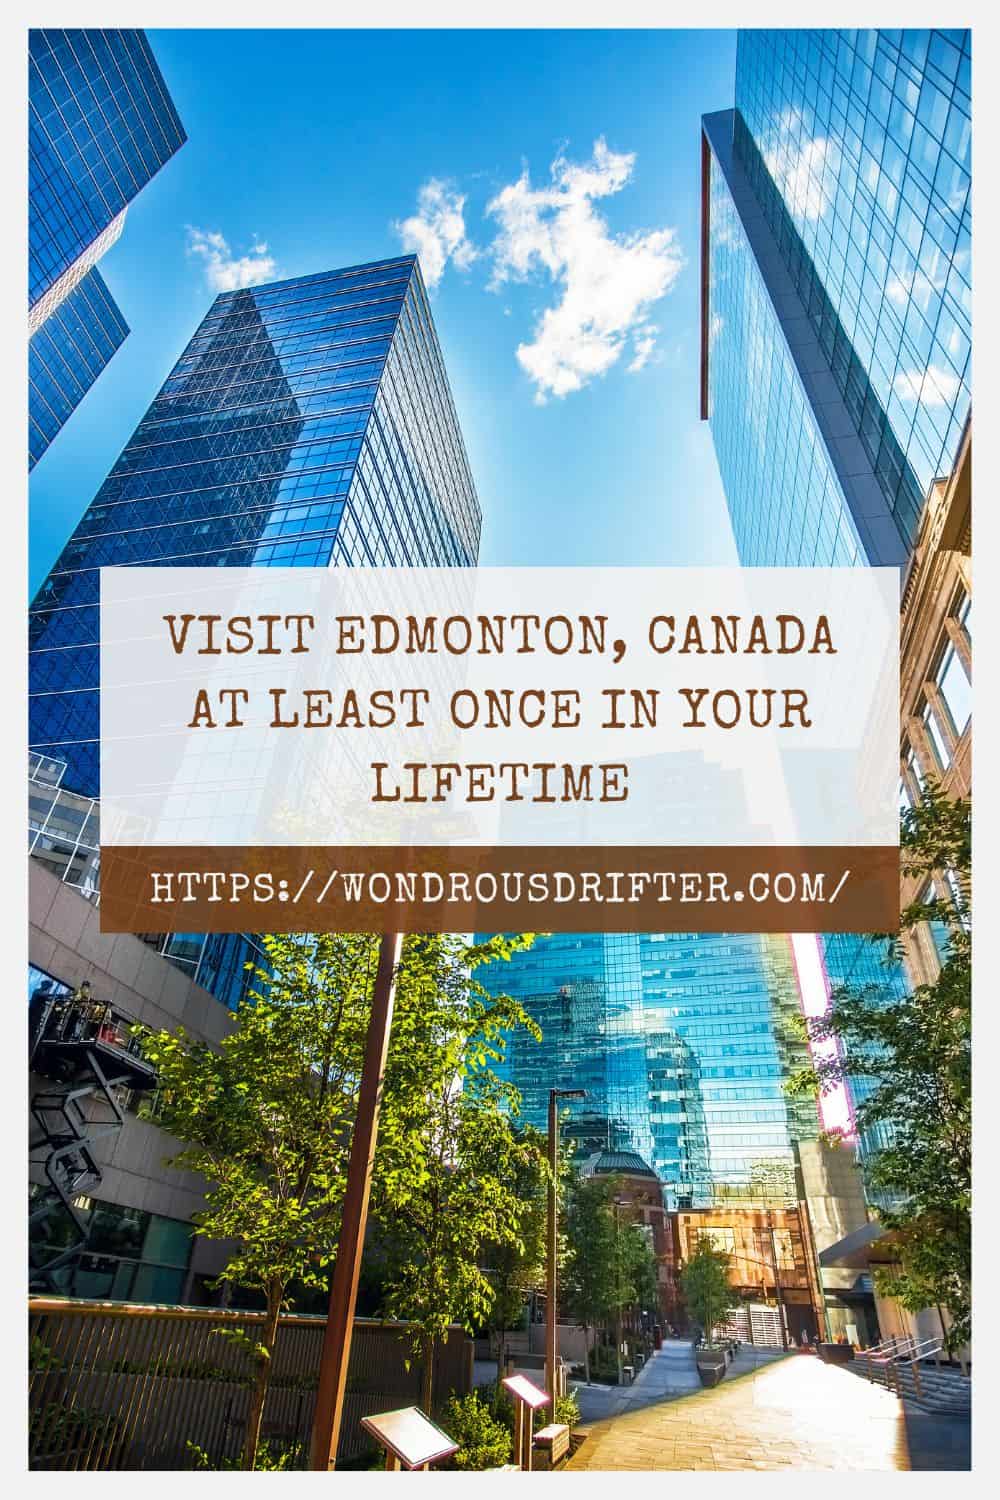 Visit Edmonton Canada at least once in your lifetime